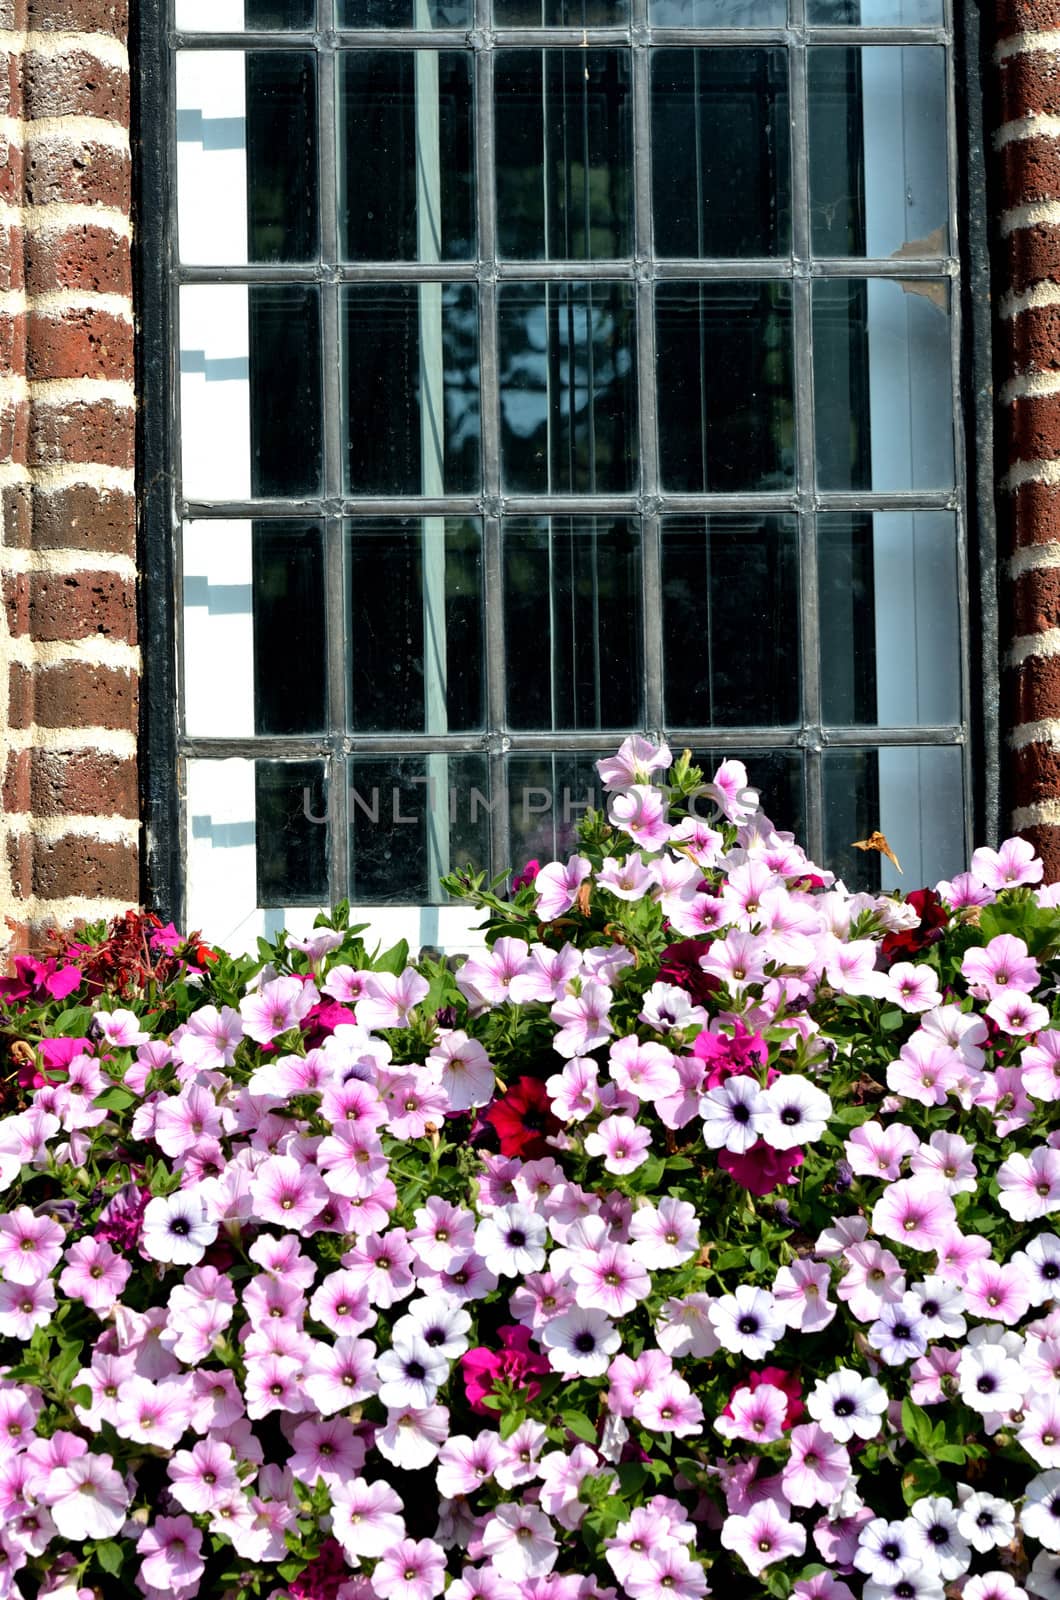 Flowers and window by pauws99